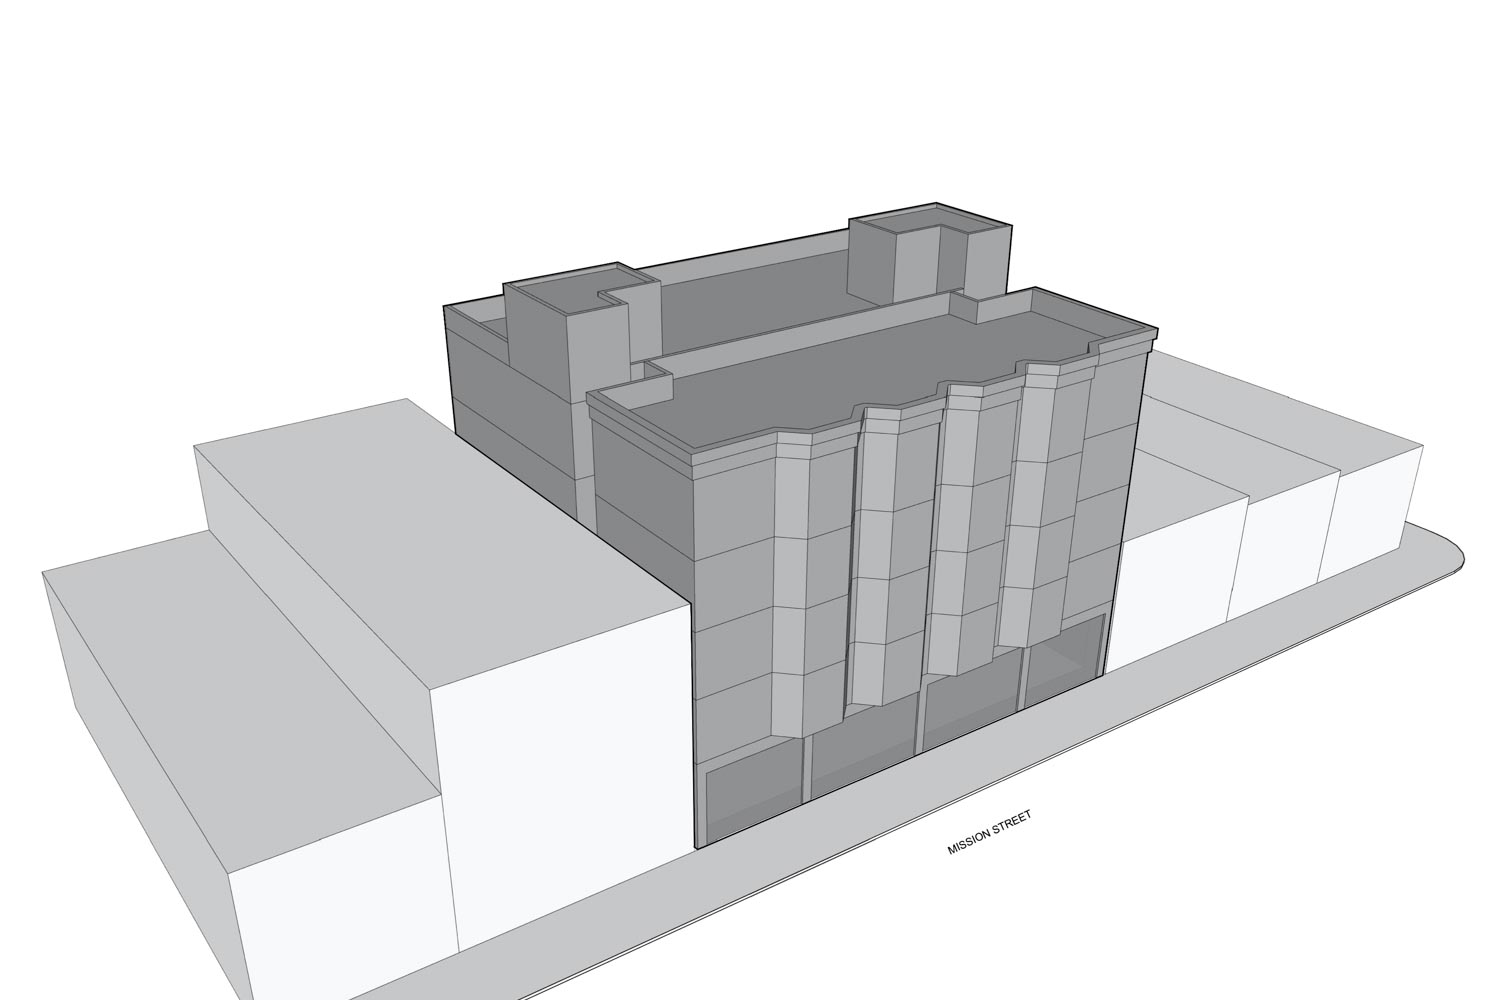 Outdated 2019 design for 2316-2326 Mission Street, by Workshop 1